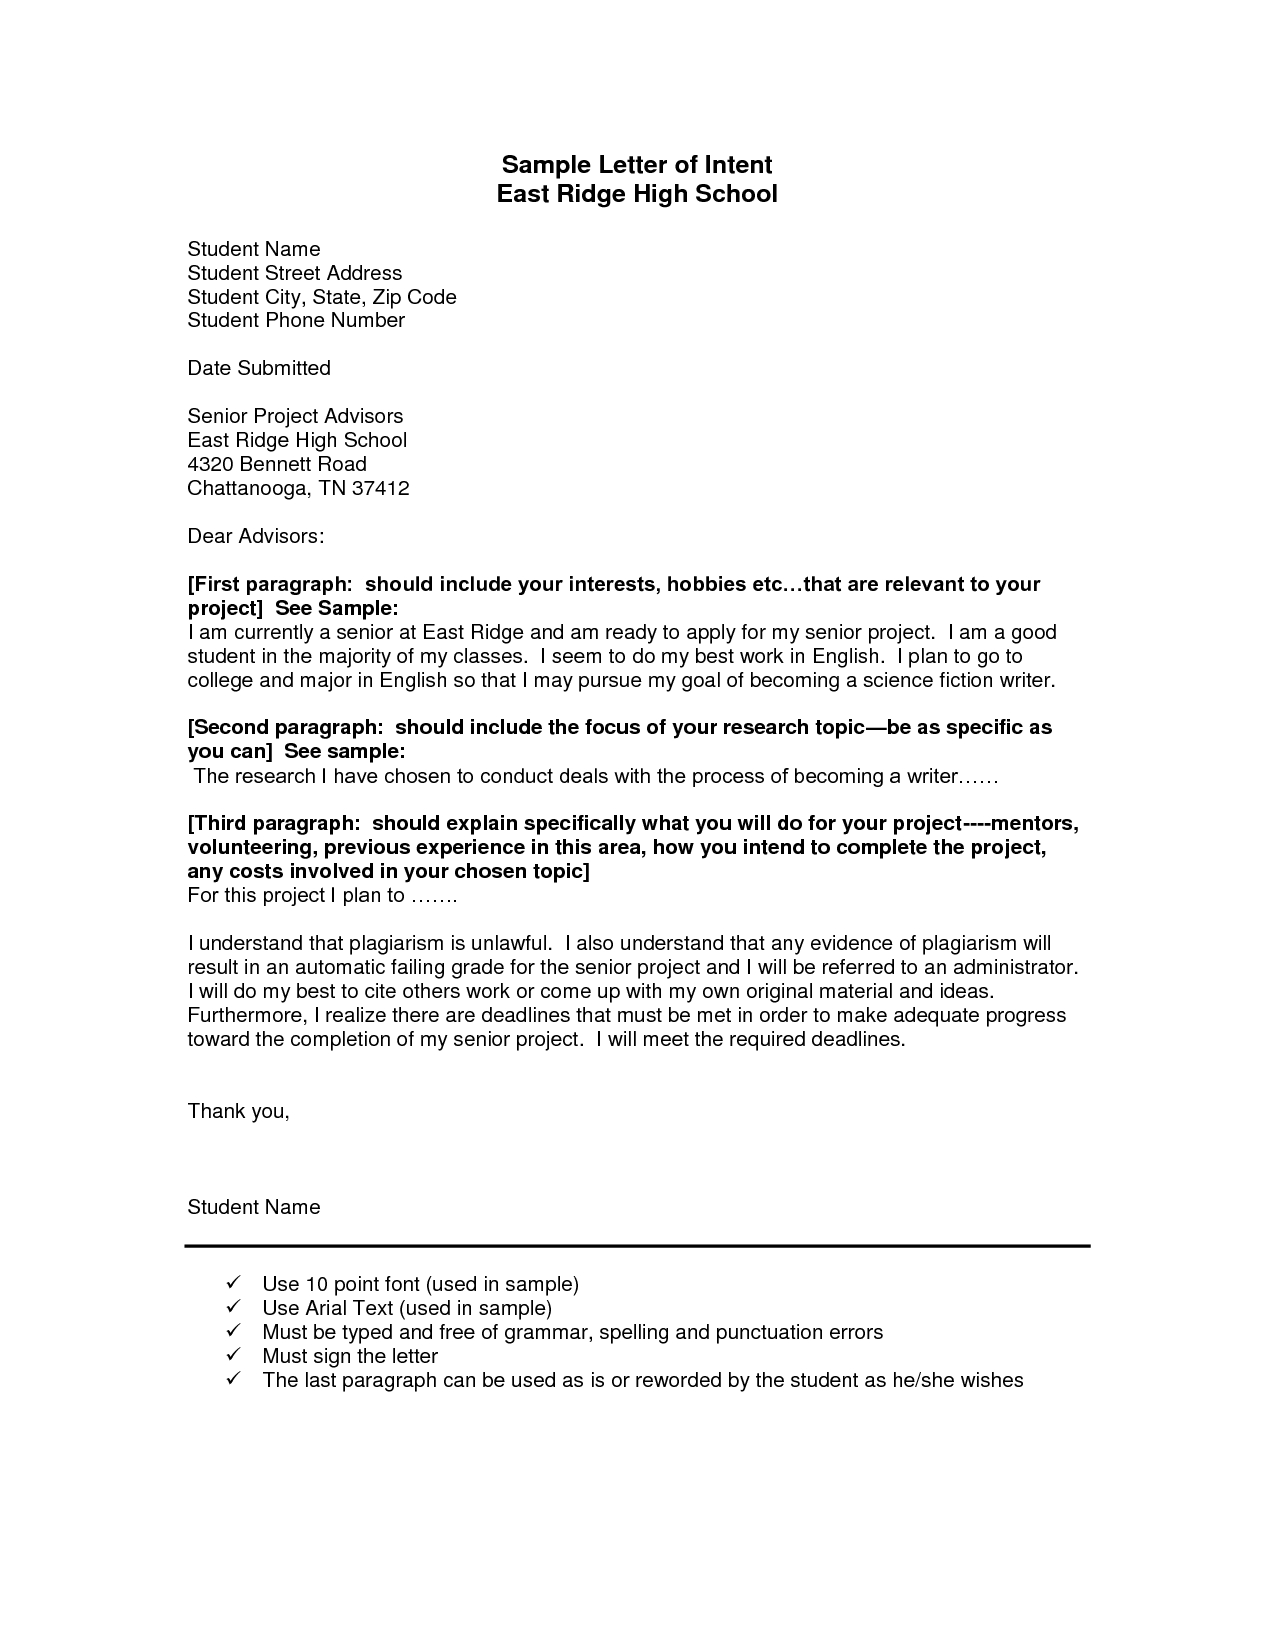 College application essay pay 2012